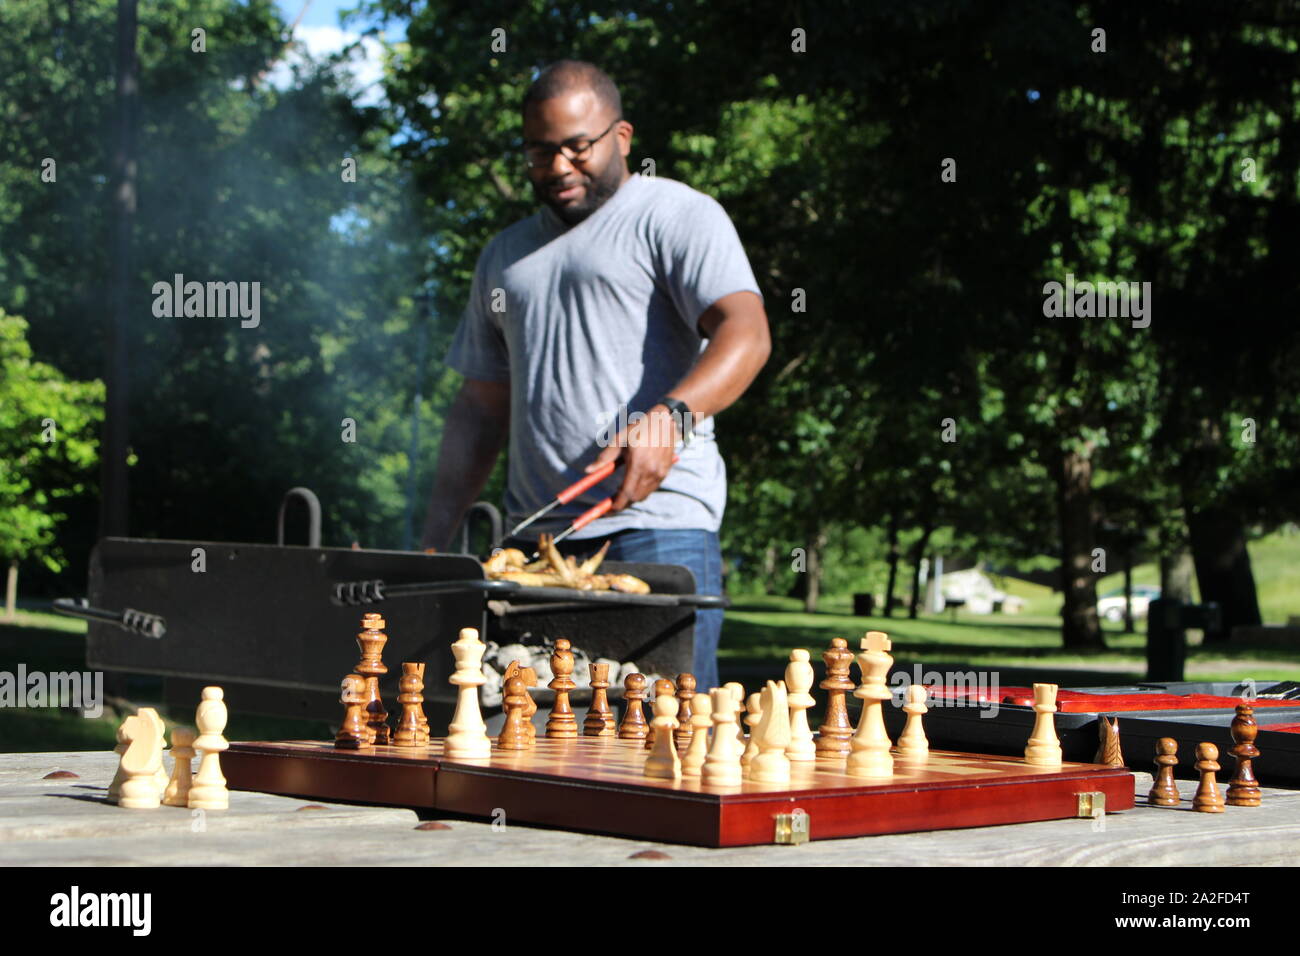 Grilling Outside and Playing a Game of Chess Stock Photo - Alamy